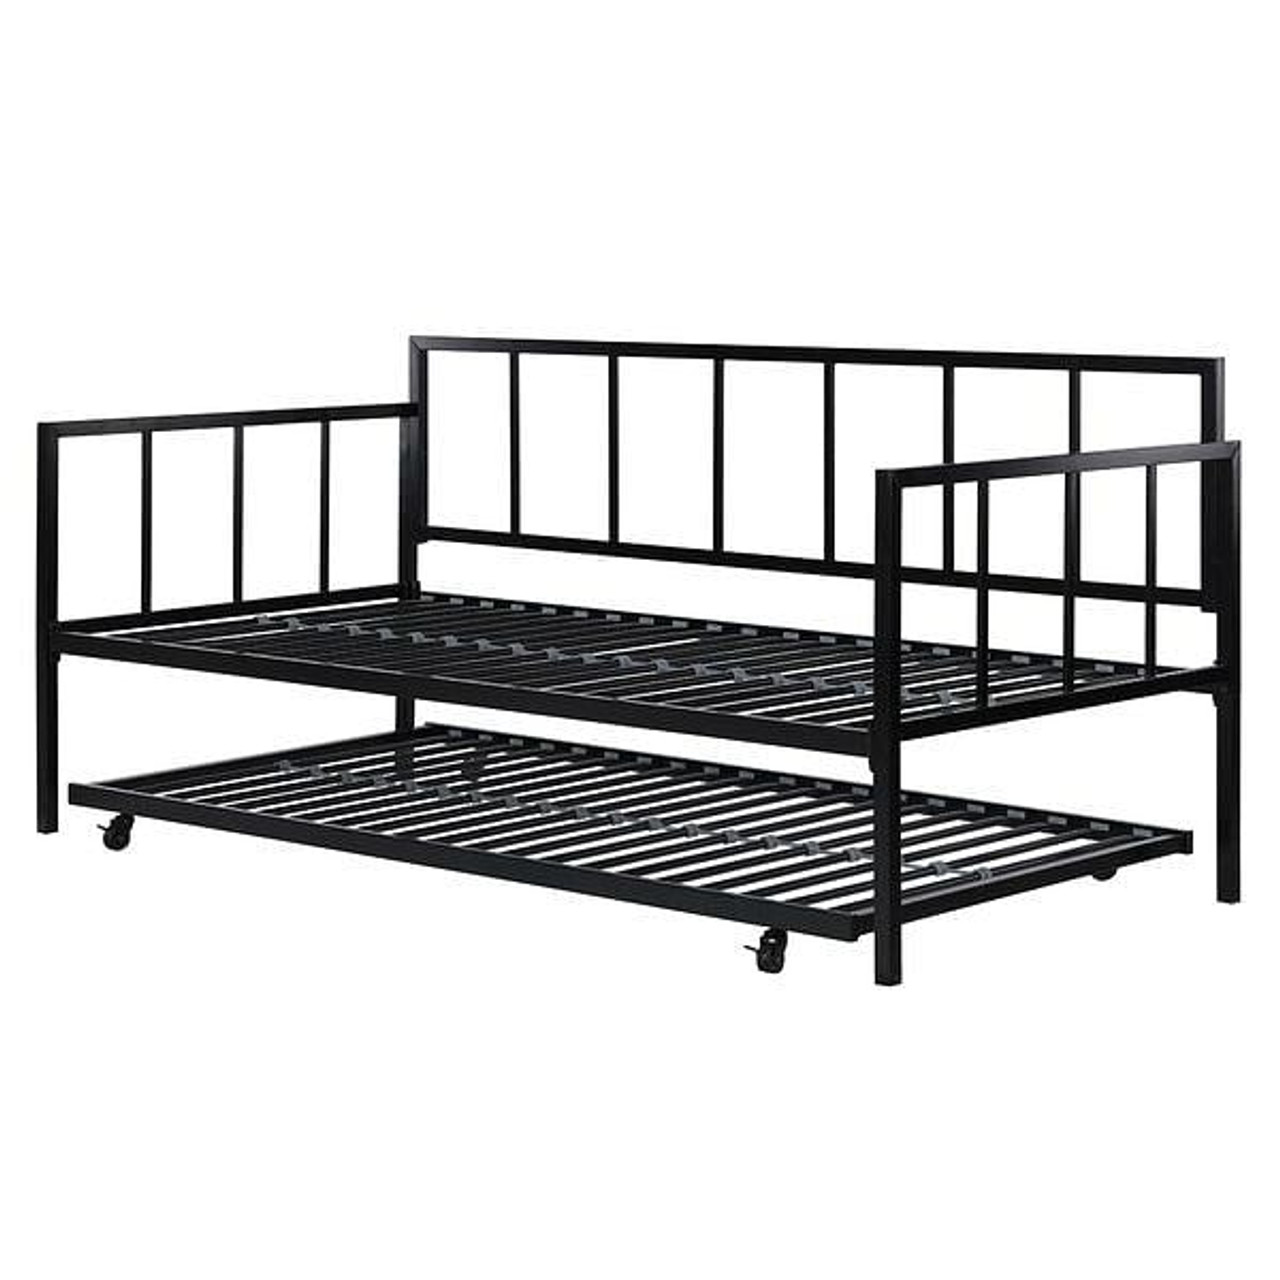 Twin size Heavy Duty Metal Daybed with Roll-Out Trundle Bed